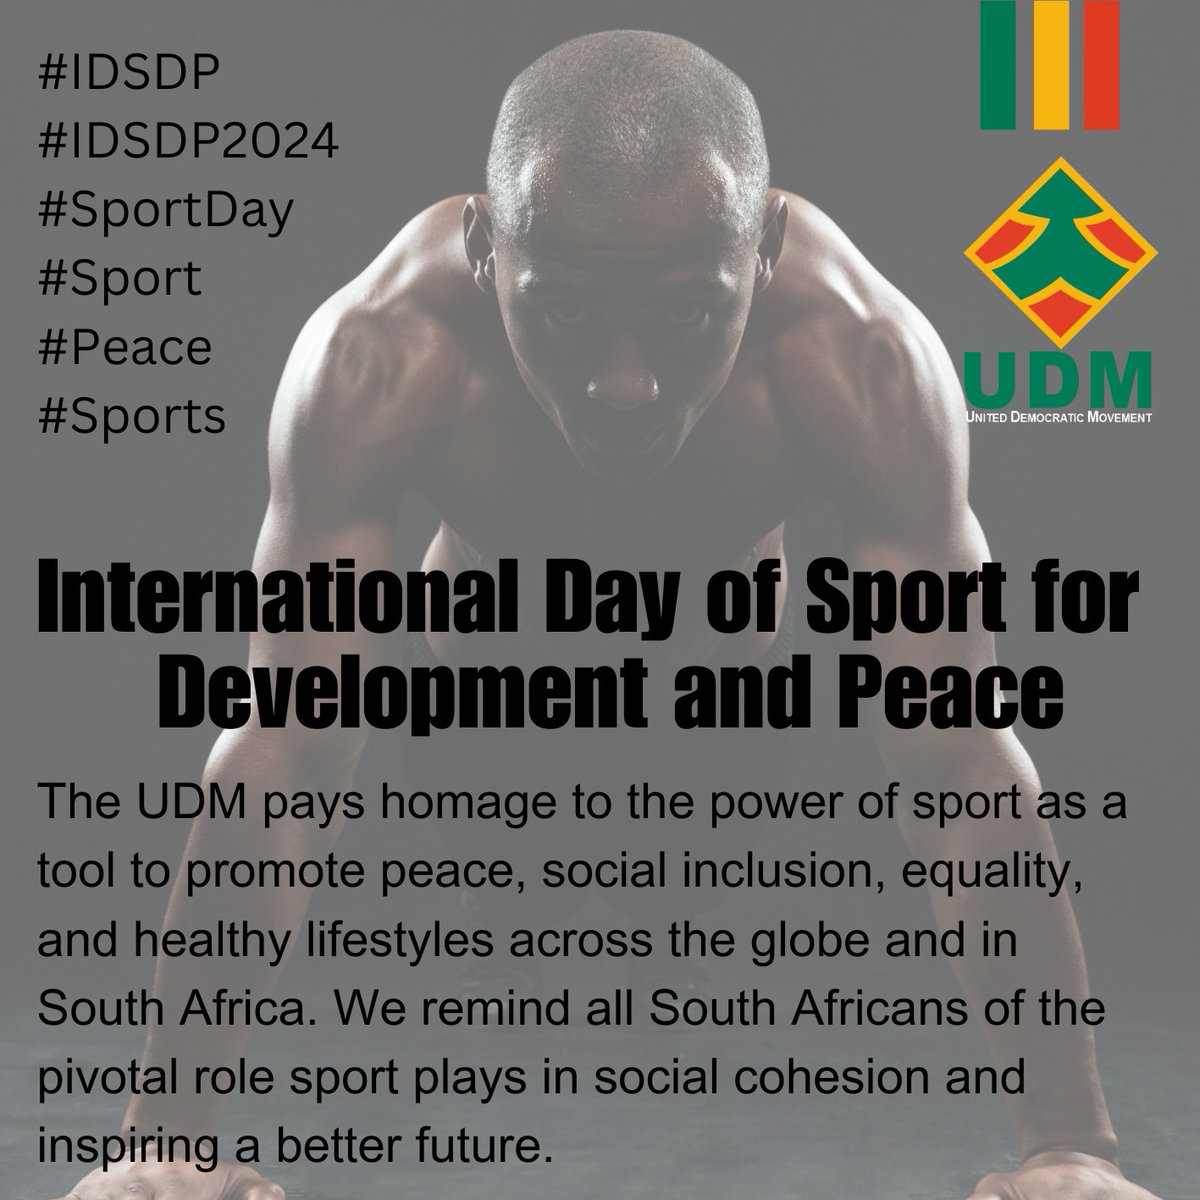 The UDM recognises the influence of sports as a catalyst for fostering peace, social cohesion, equality, and well-being worldwide. Sports play a vital role in shaping a unified and sustainable future for everyone.

#IDSDP, #IDSDP2024, #SportDay, #Sport, #Peace